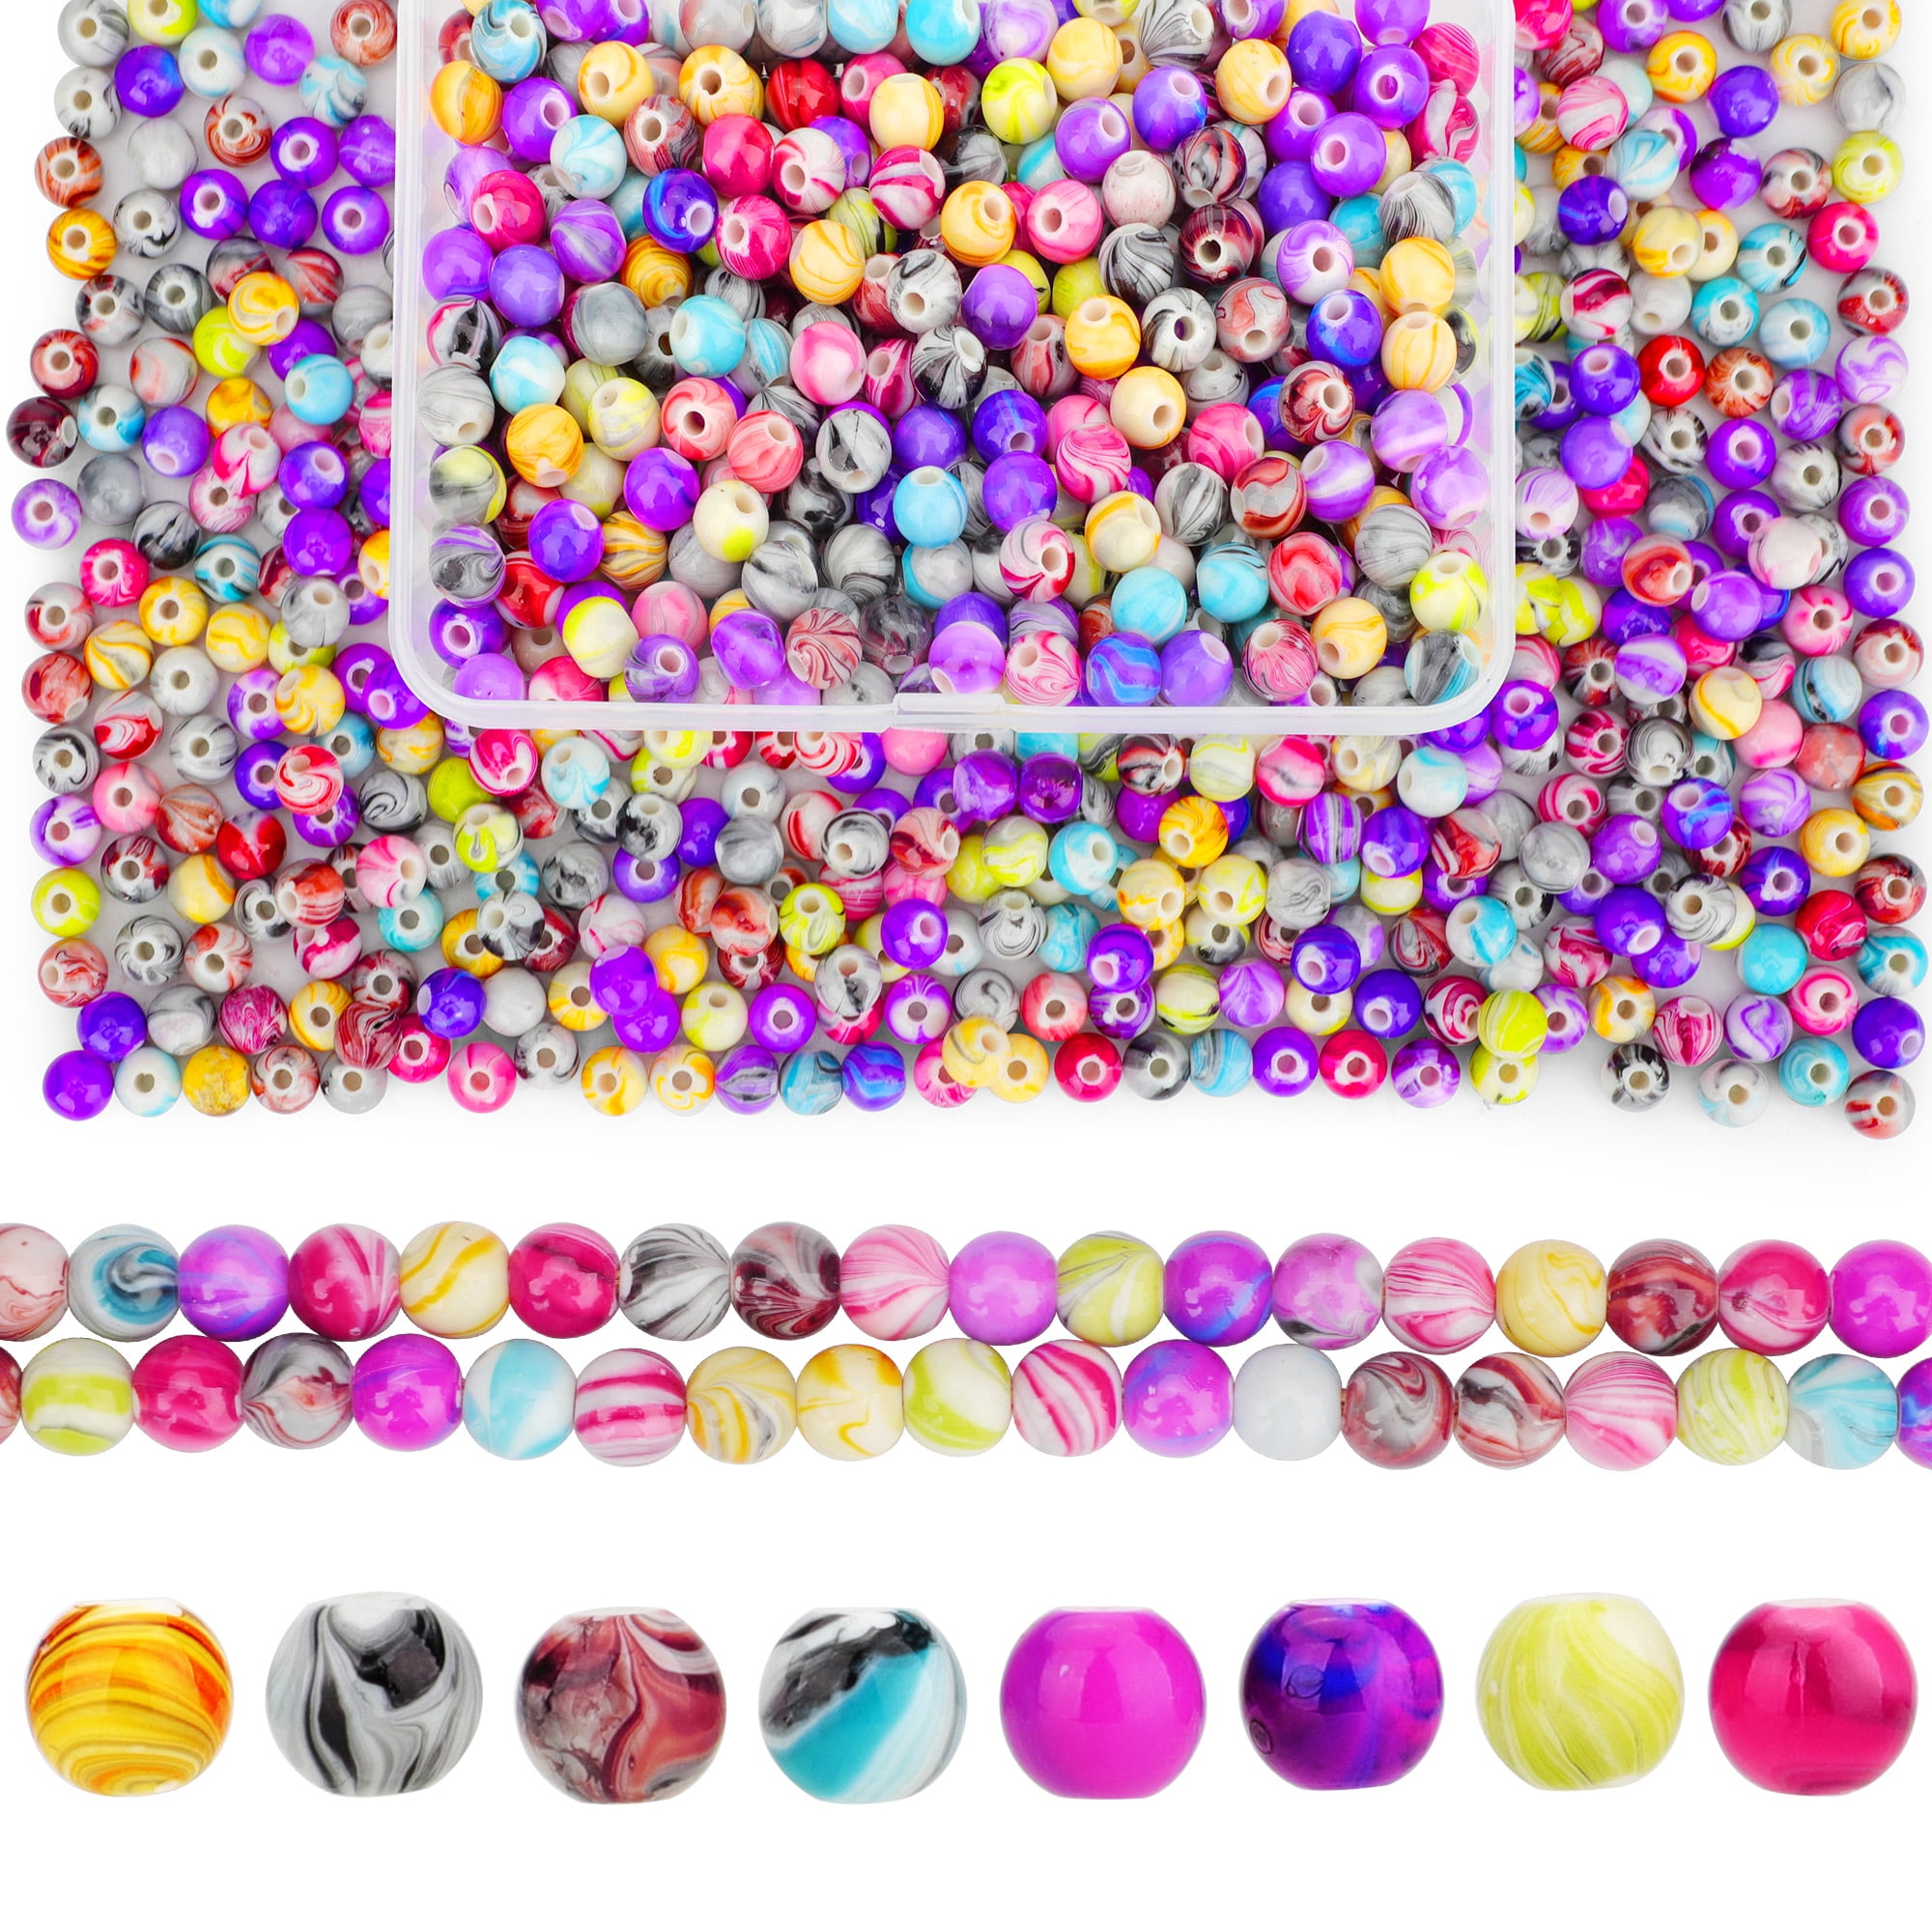 300pcs Wholesale Briolette Crystal Glass Beads, EEEkit 8mm Faceted Rondelle Crystal  Beads, Crackle Lampwork Glass Beads, Beading Supplies Jewelry Tool for DIY  Craft Bracelet Necklace Jewelry Making 